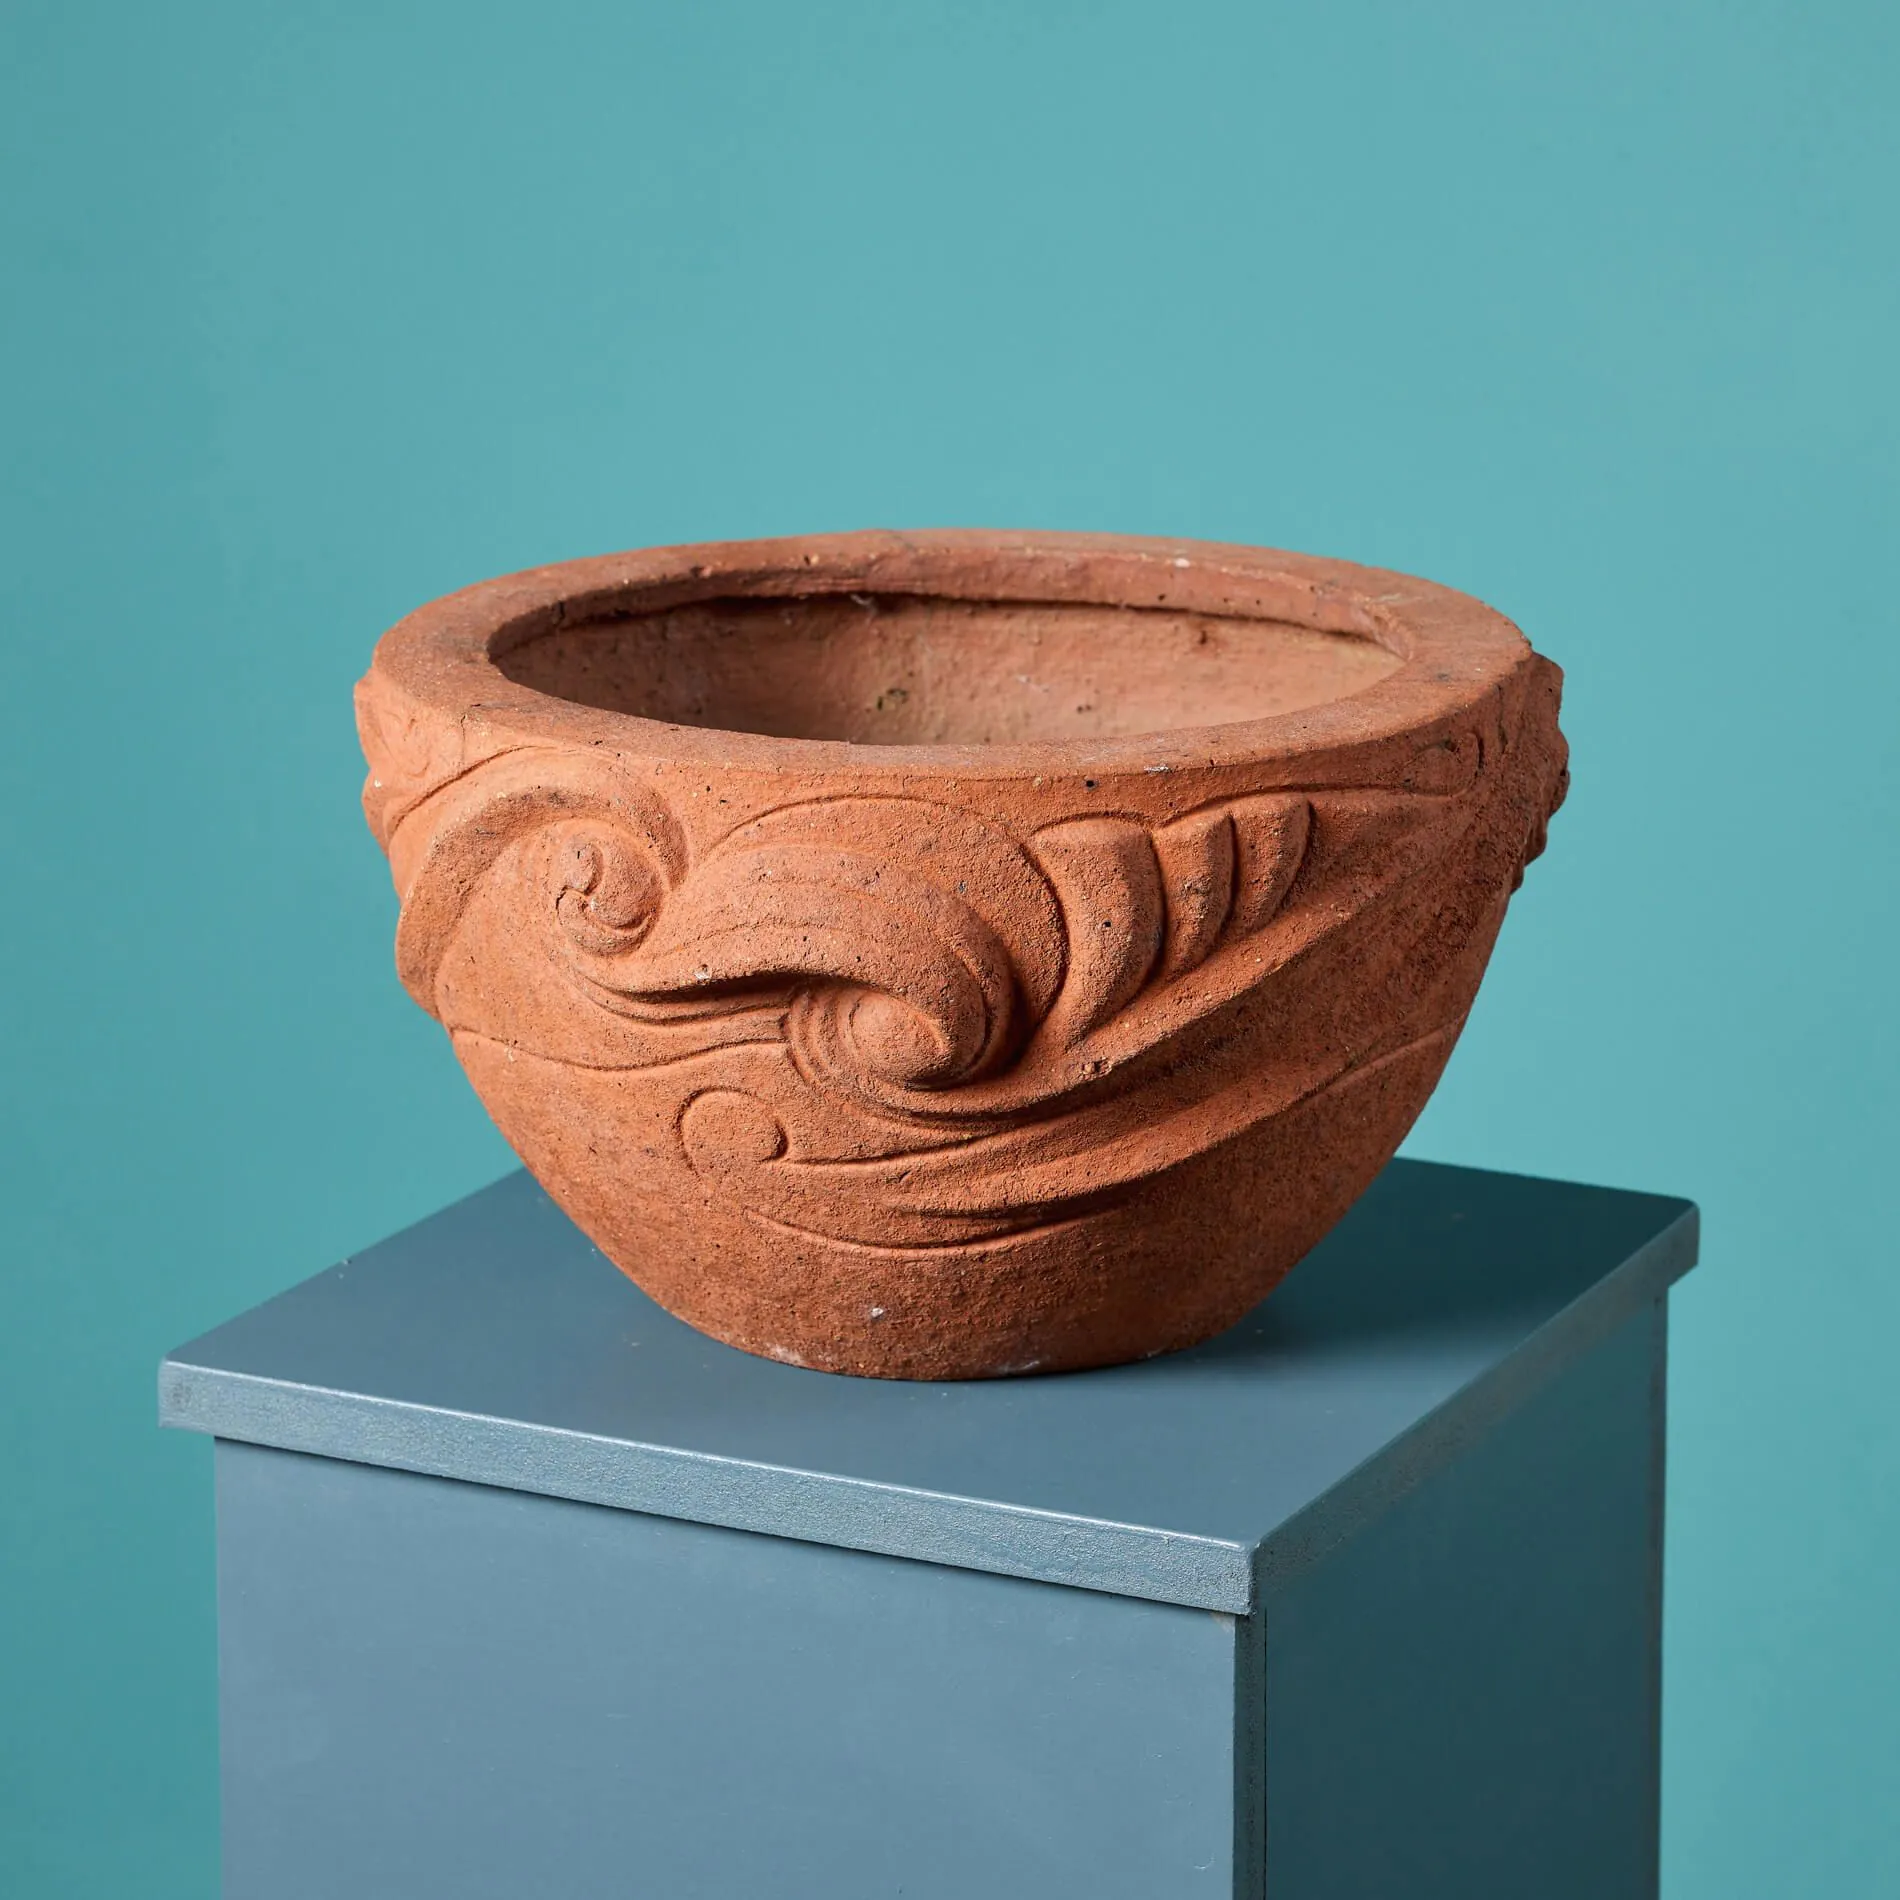 A terracotta pot with intricate swirl and leaf patterns sits atop a blue pedestal against a blue background, reminiscent of designs from Microsoft Montpellier. The pot has a wide, circular opening and an earthy texture.